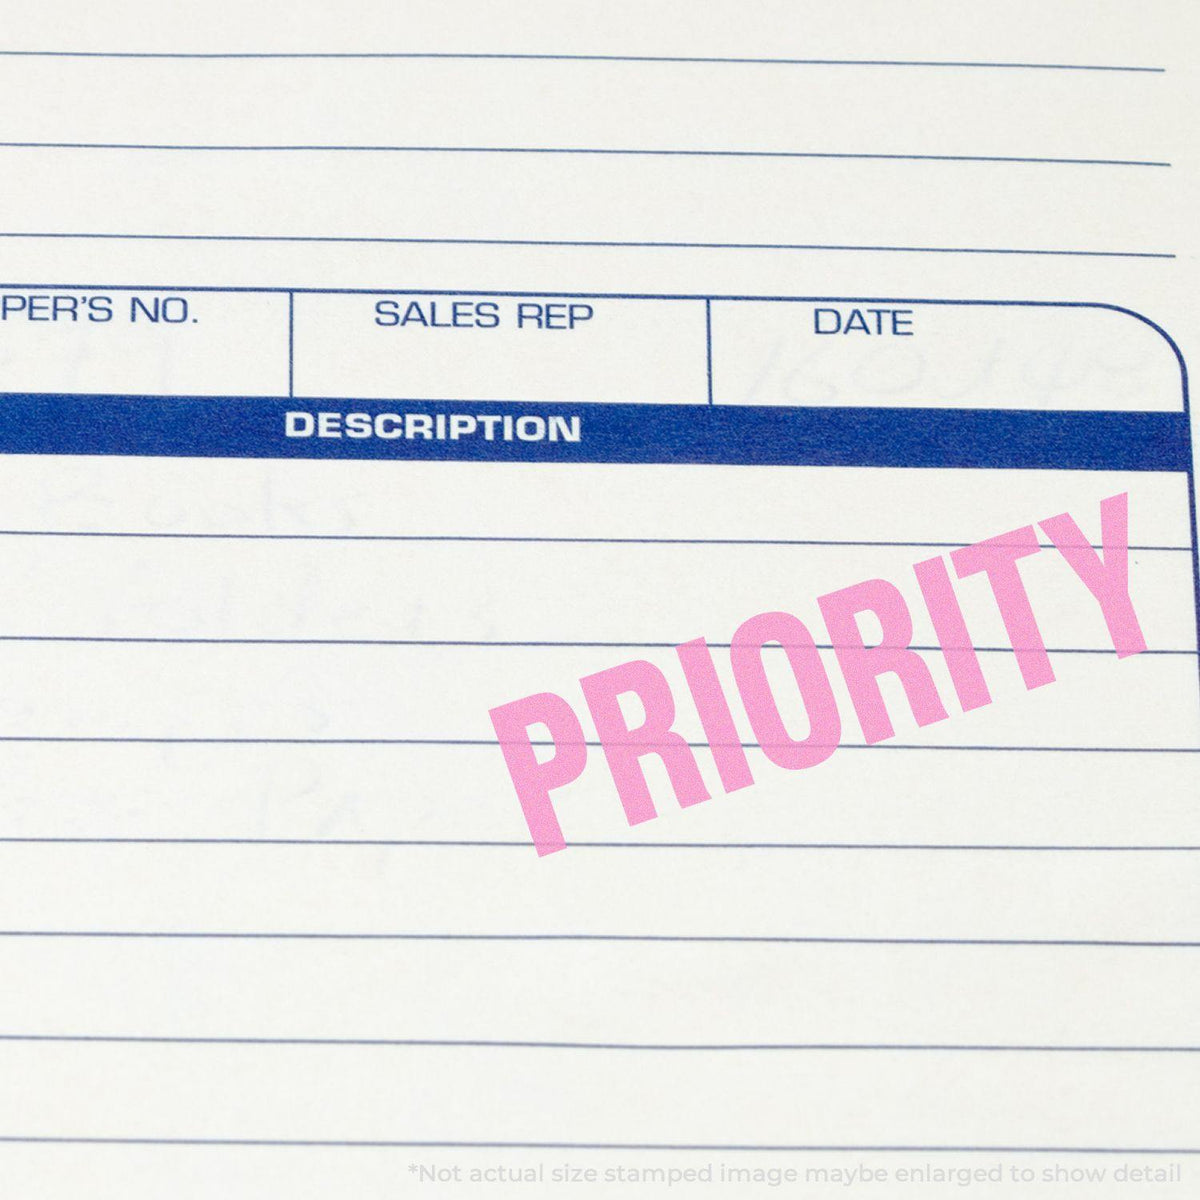 Large Bold Priority Rubber Stamp In Use Photo